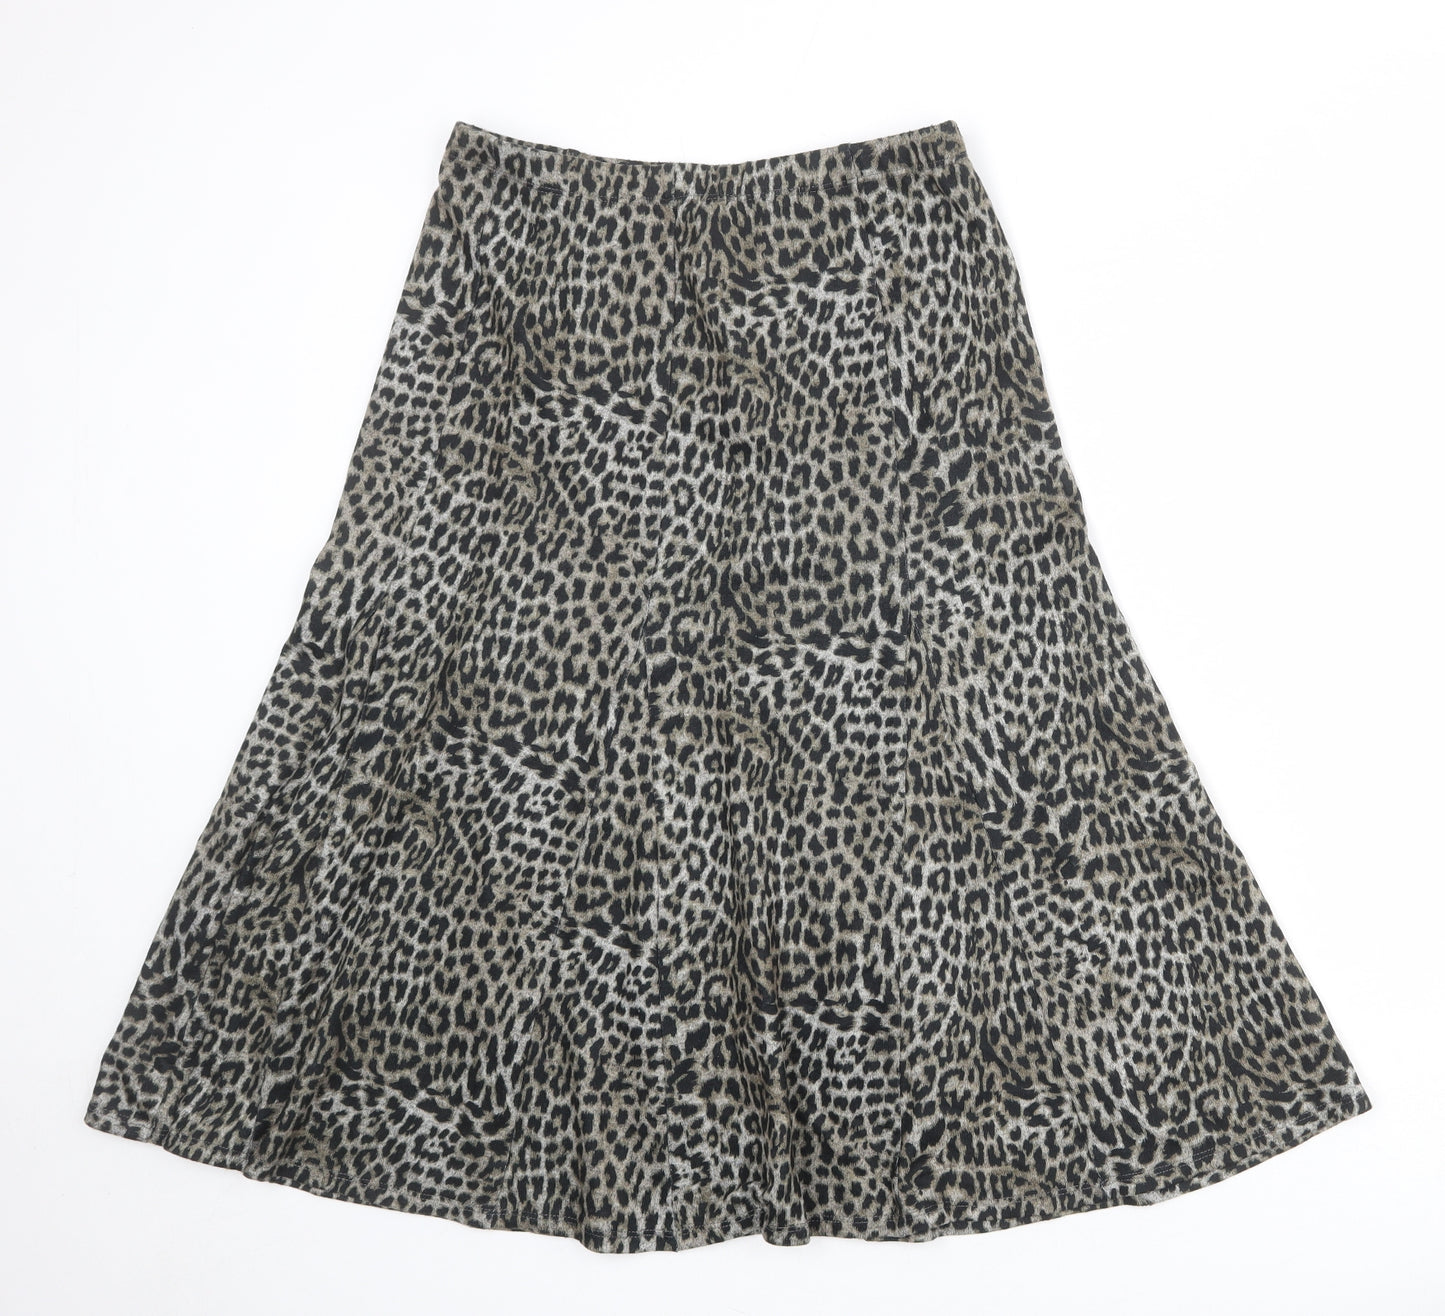 M&Co Womens Multicoloured Animal Print Polyester Swing Skirt Size 10 - Leopard pattern